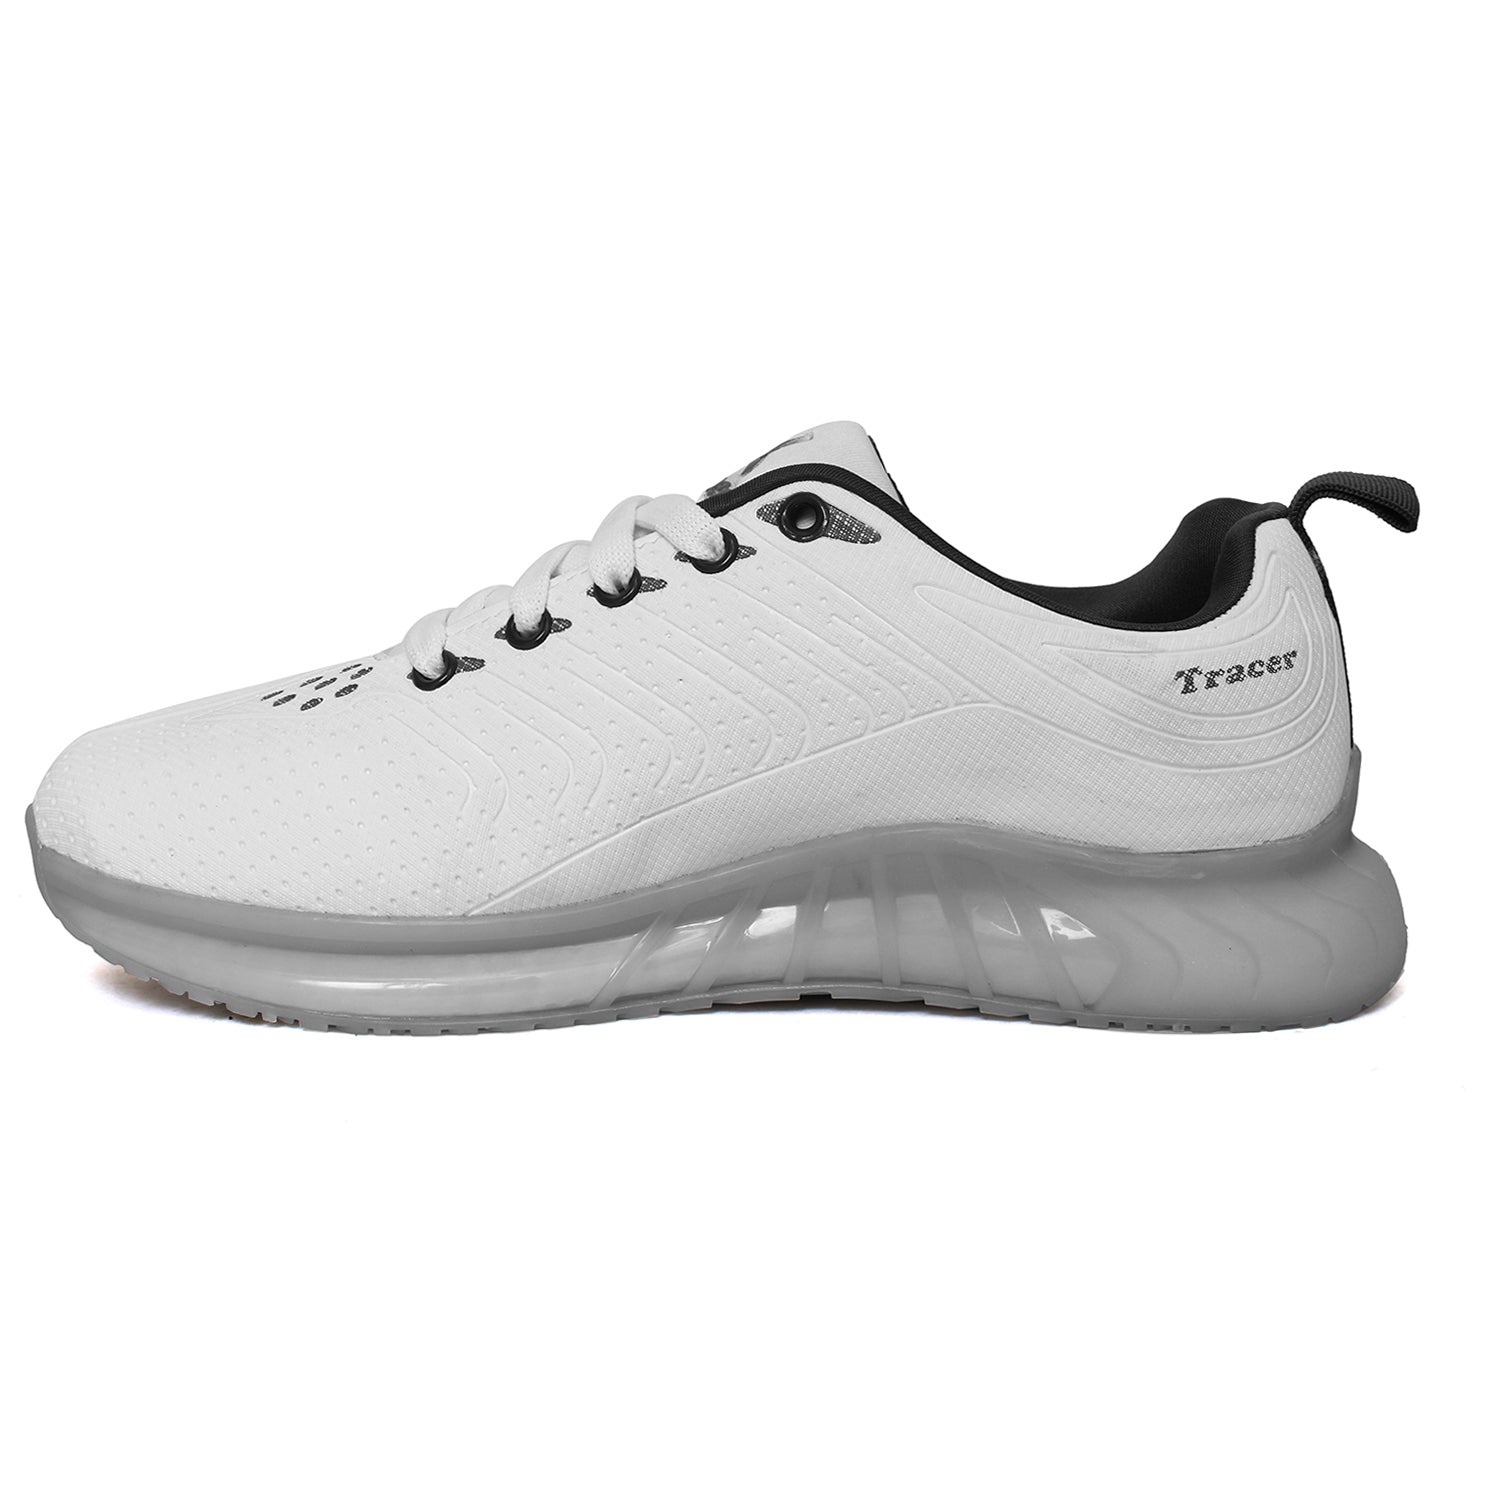 Tracer Storm 12 Men's Sneakers White